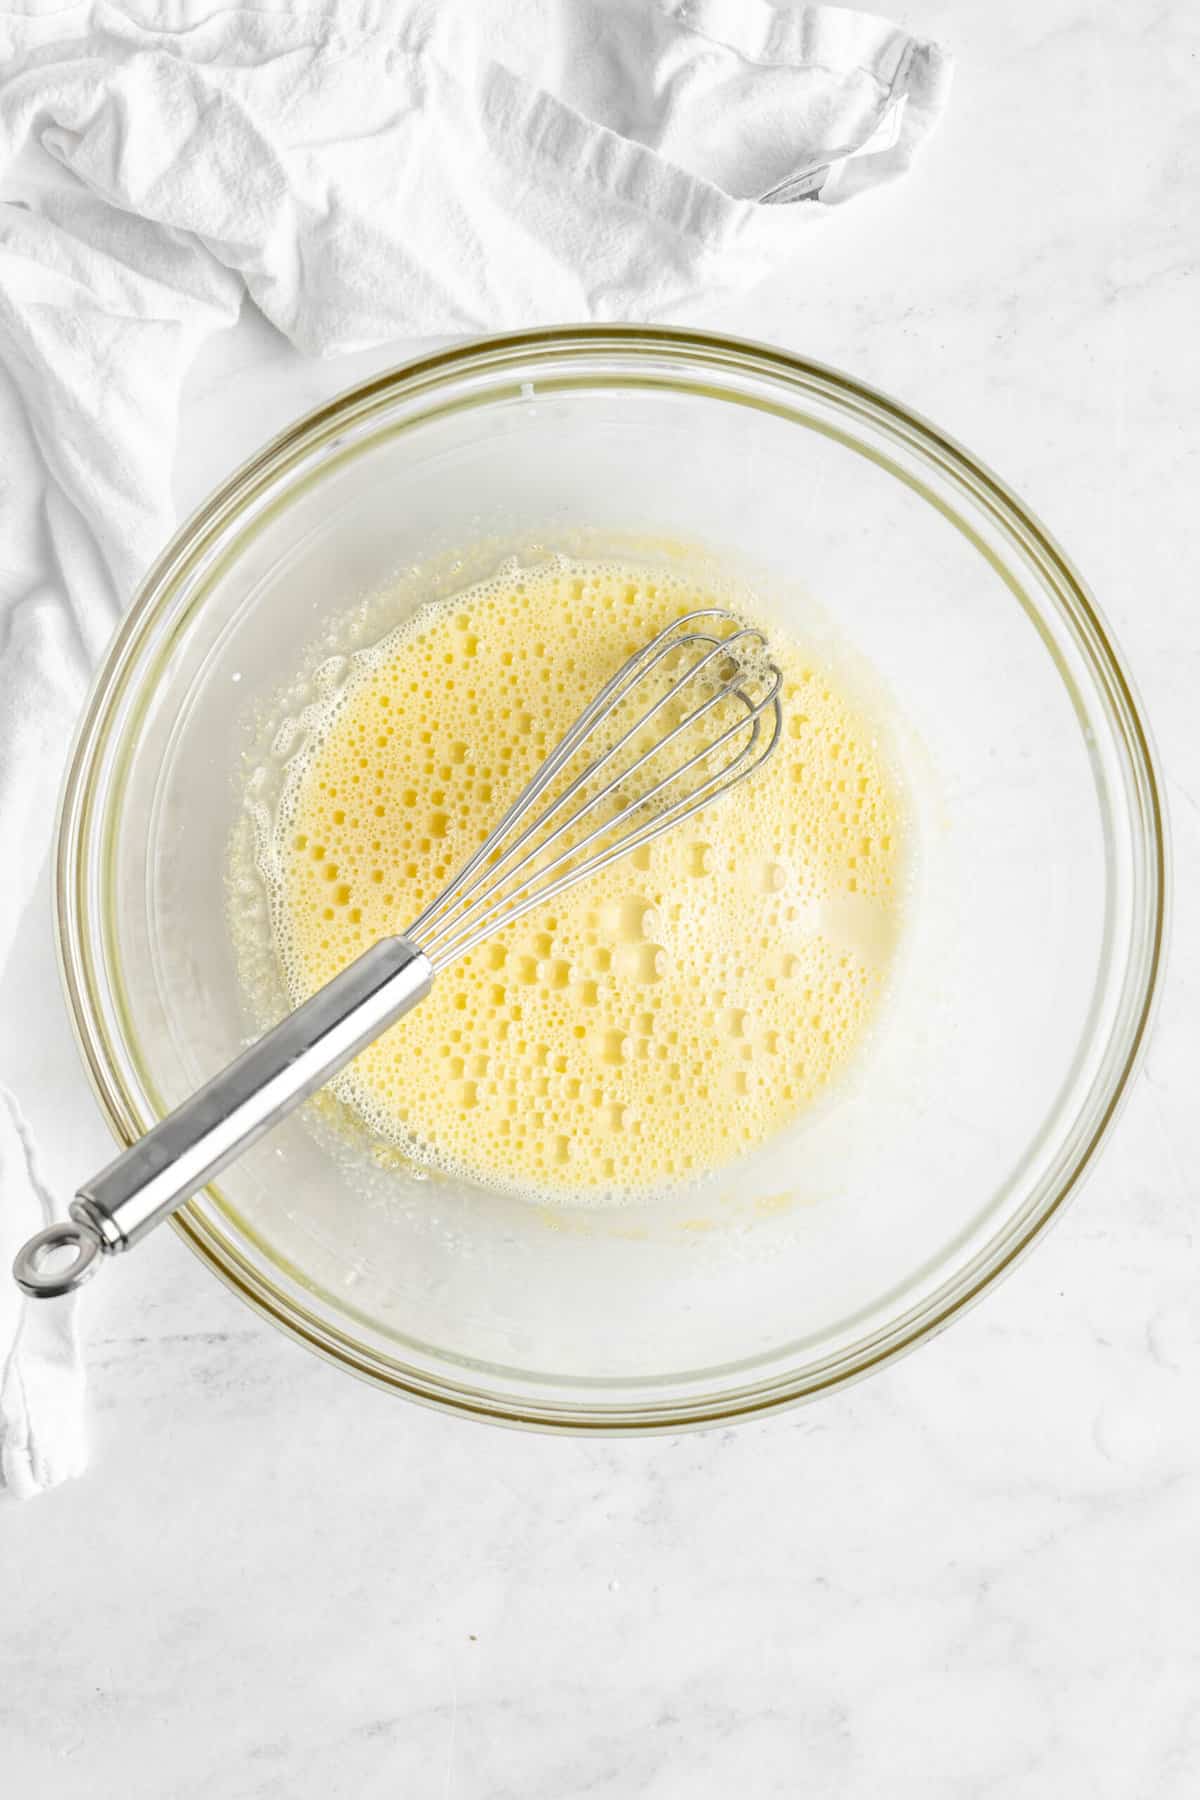 Vanilla drizzle being whisked in a large glass mixing bowl.